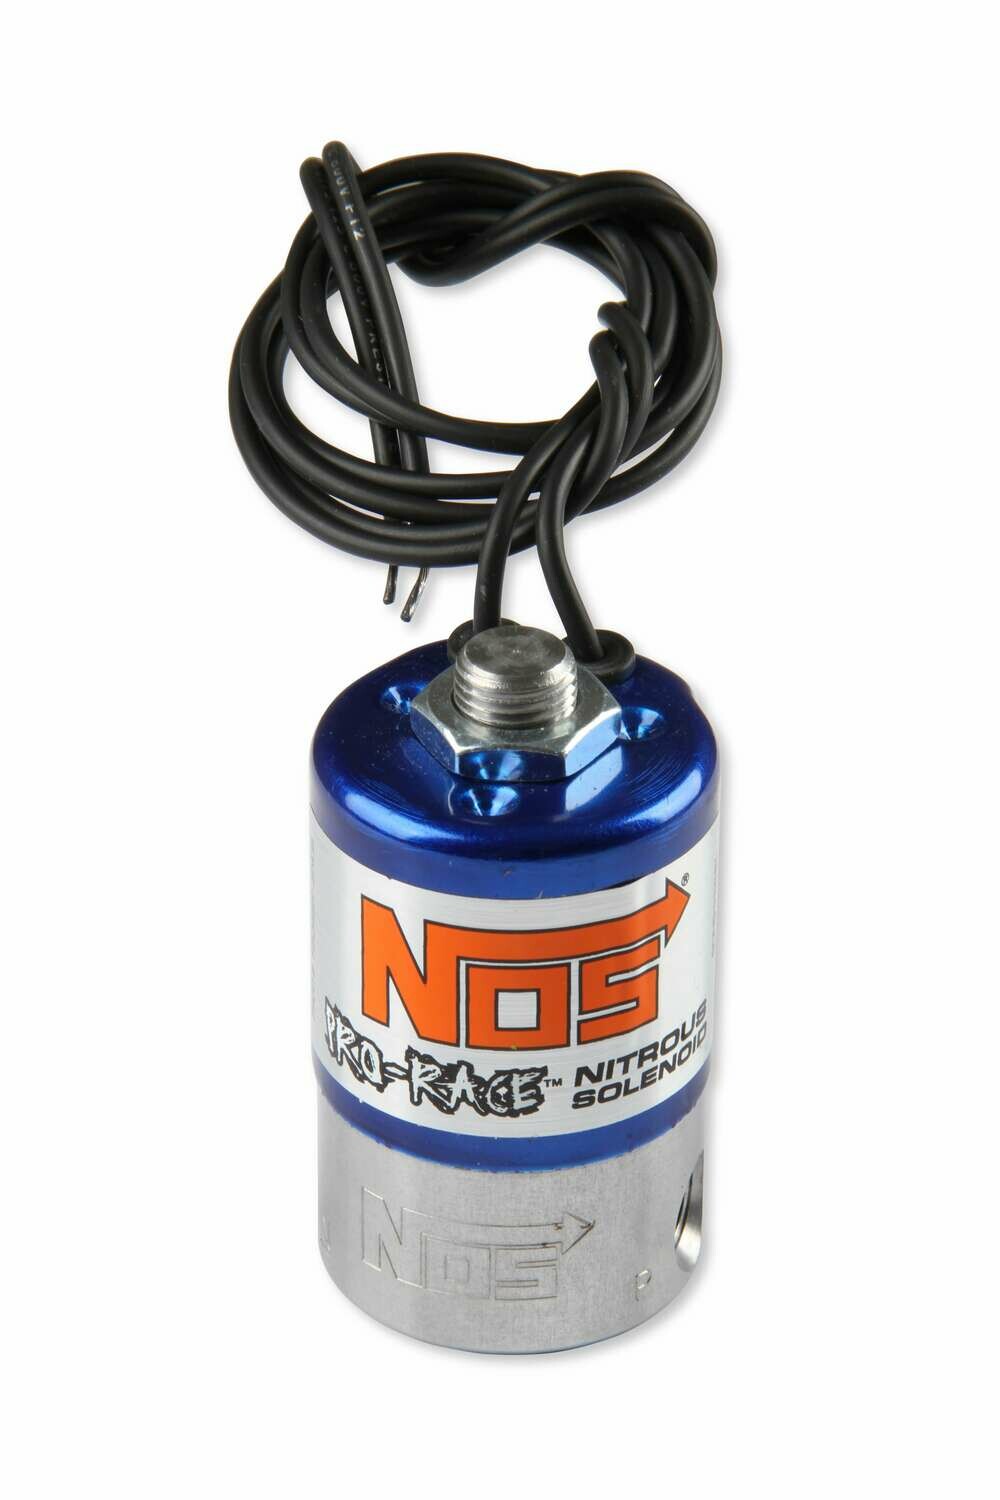 NOS Pro-Race Nitrous Solenoid (The Trash Can)